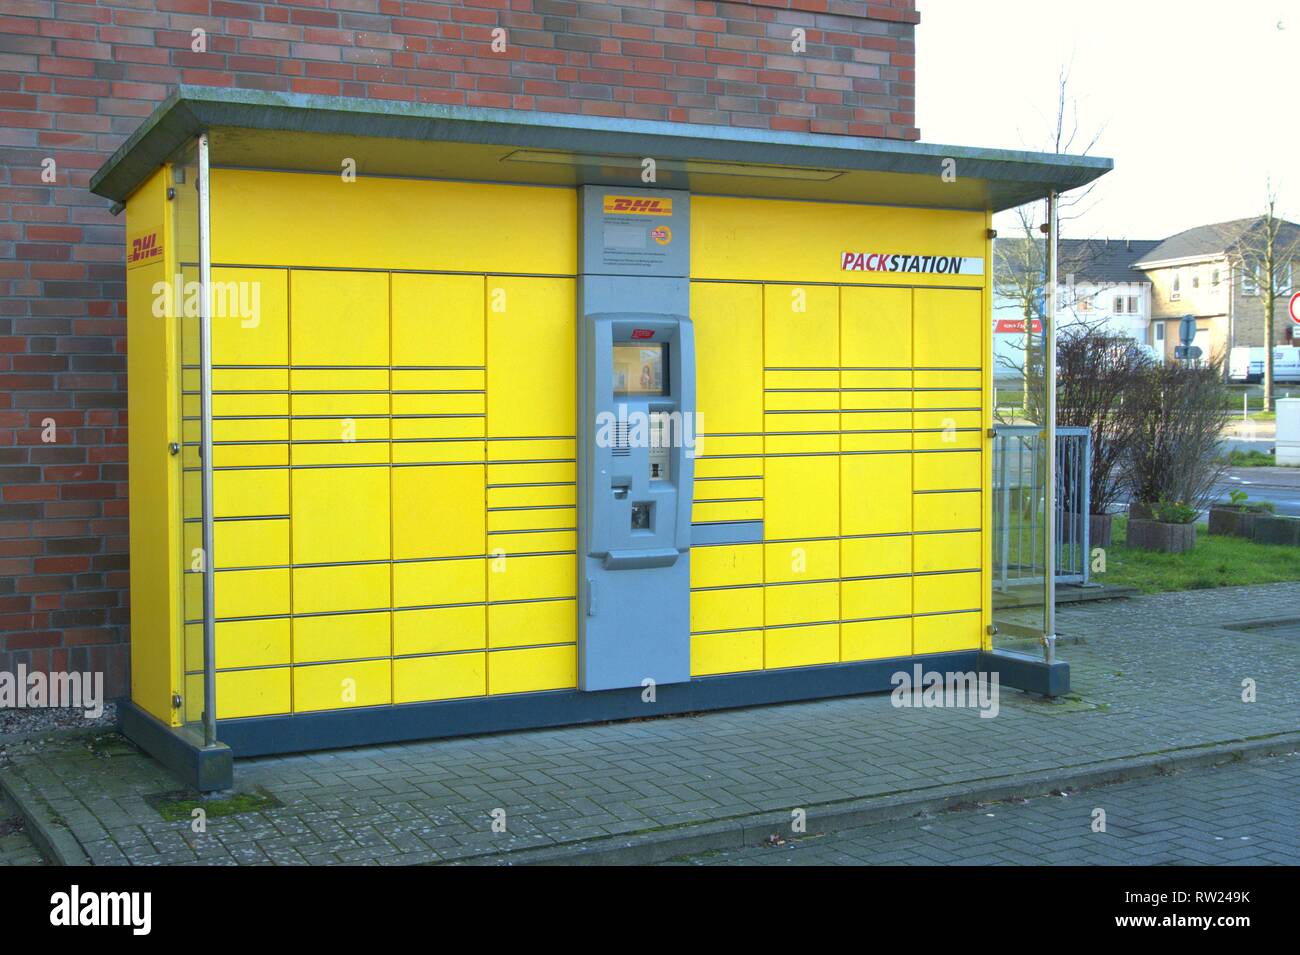 A packing station of the parcel service DHL at the city field in Schleswig.  It is